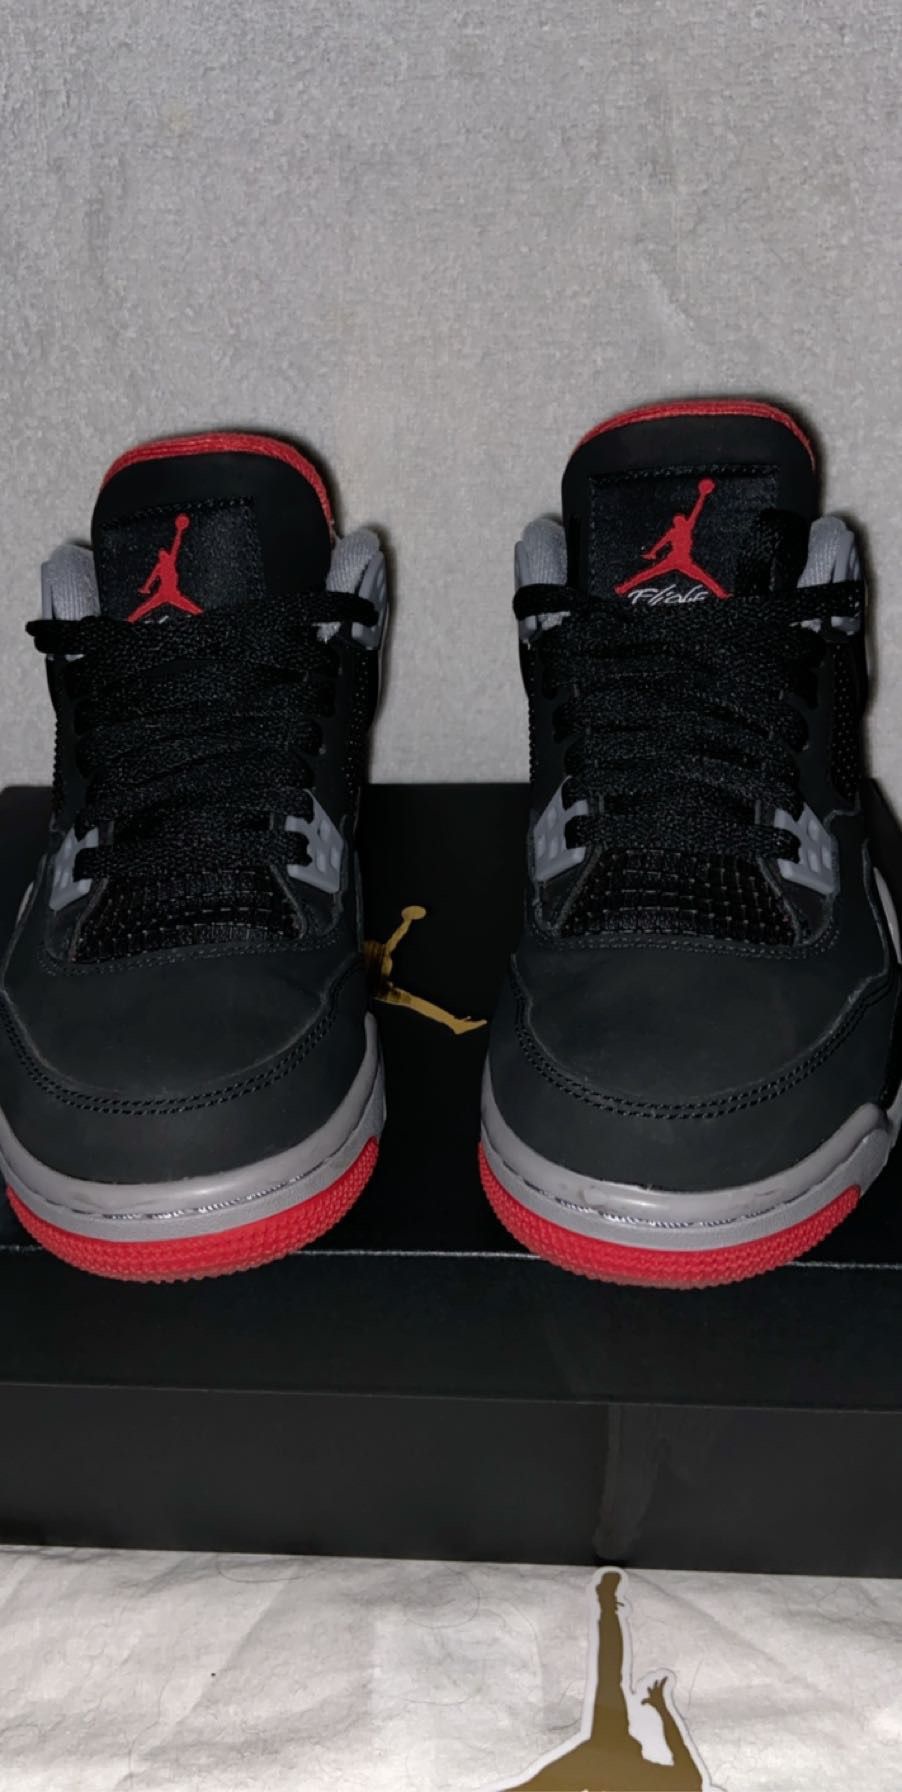 Bred 4s size 5.5